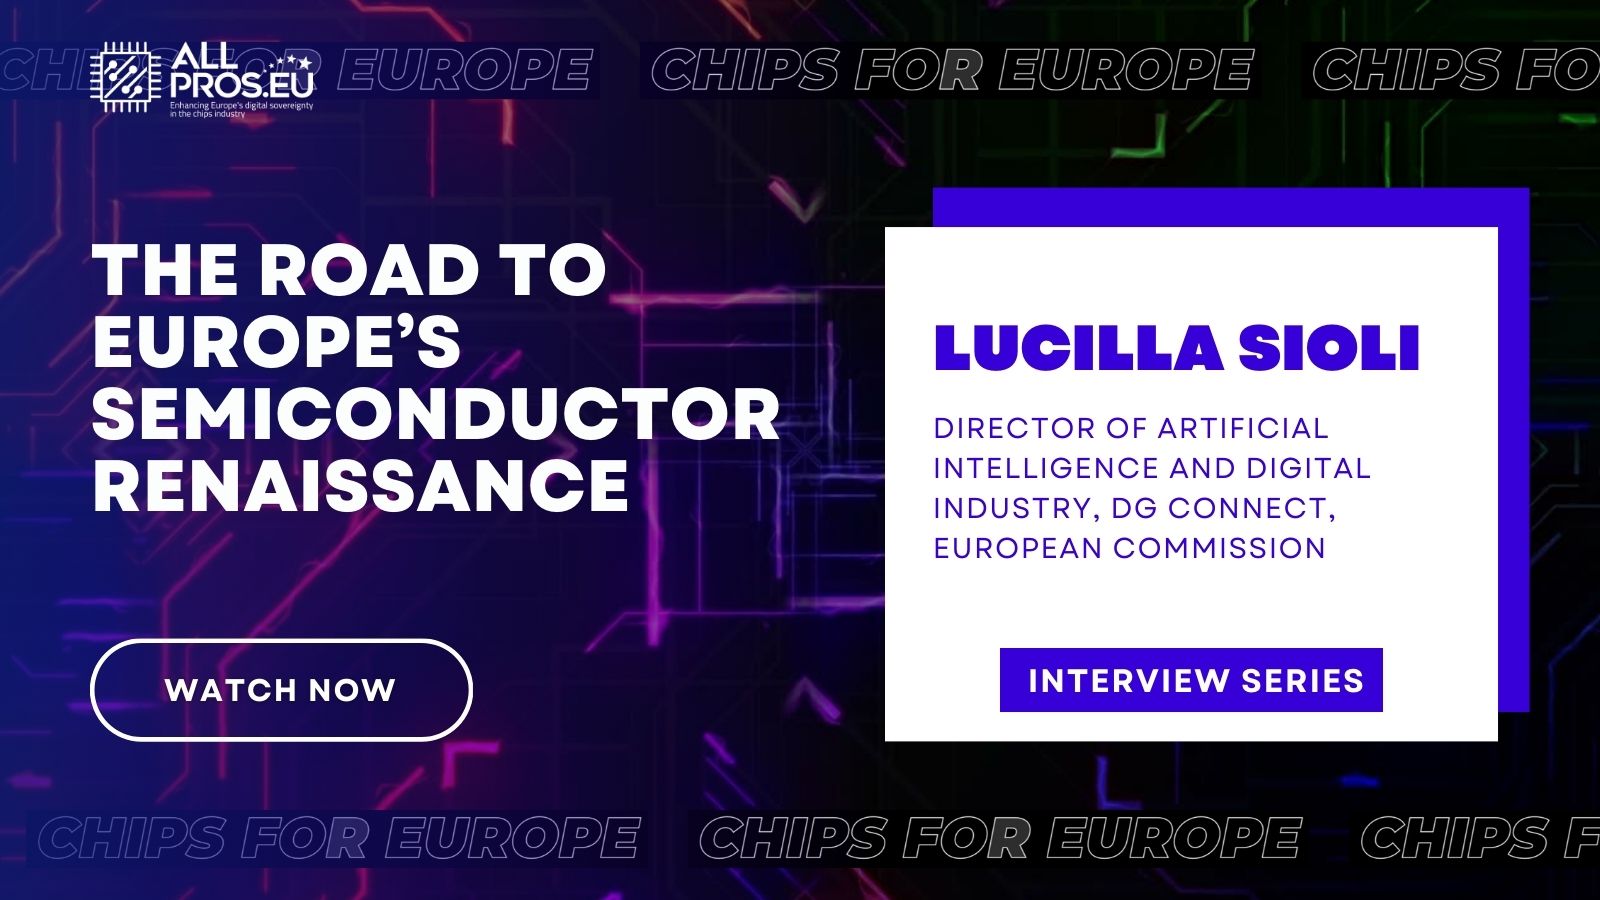 Interview with Lucilla Sioli, Director at DG Connect, European Commission